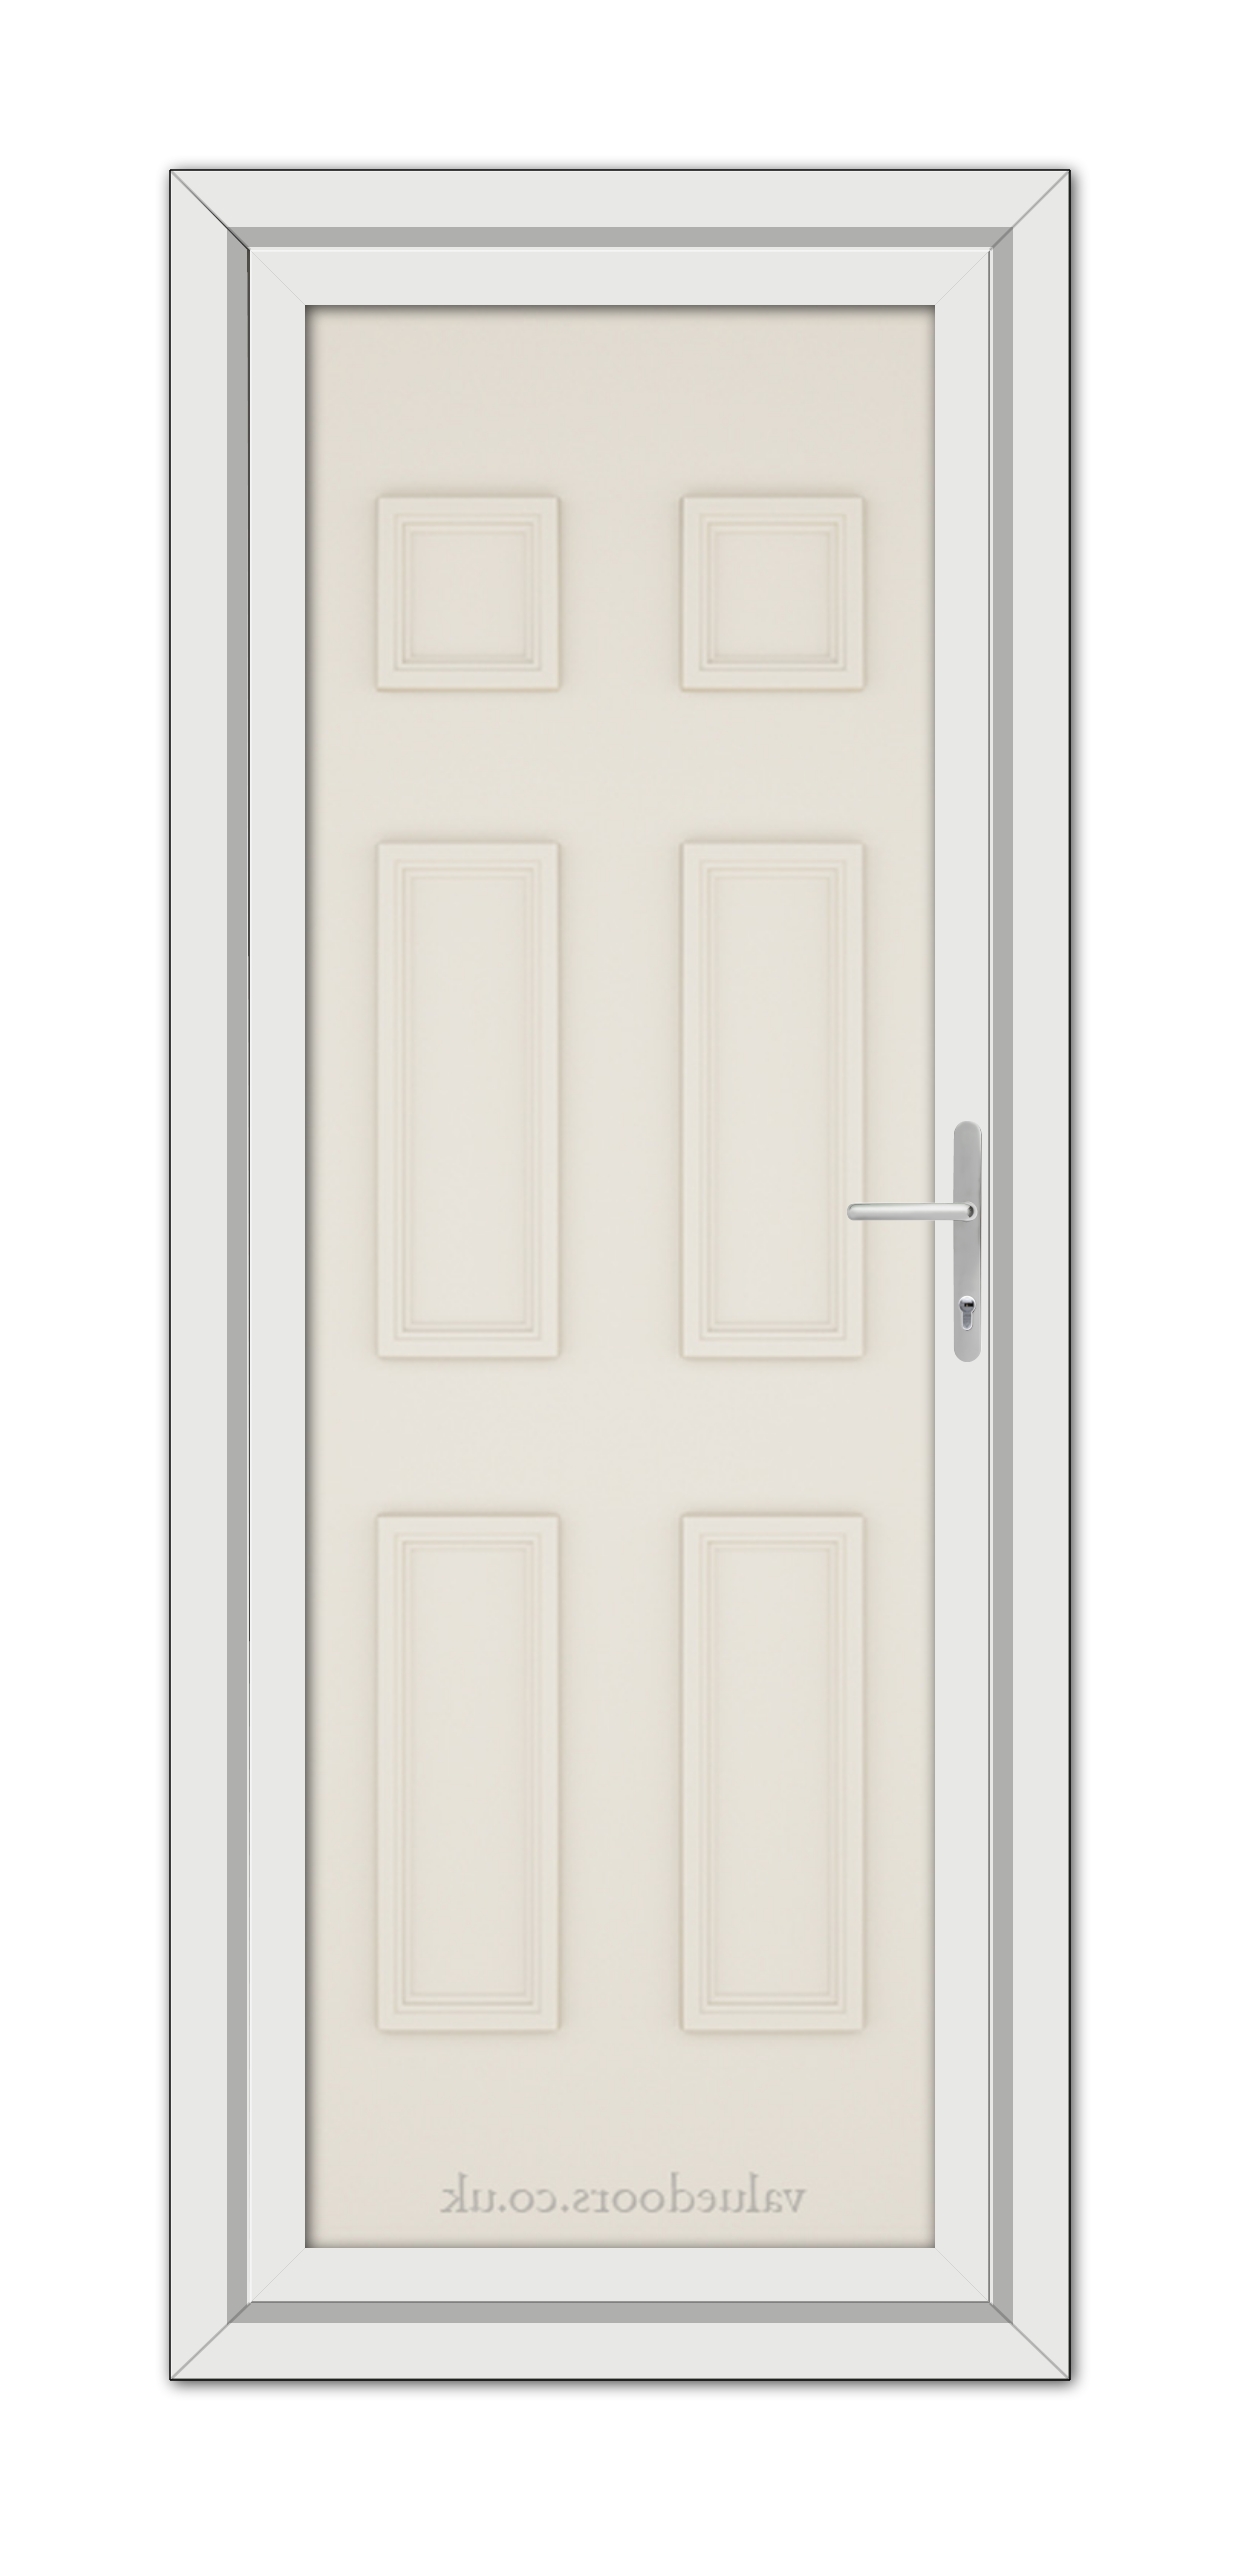 A vertical image of a closed Cream Windsor Solid uPVC Door with six panels and a silver handle, set within a light grey frame.